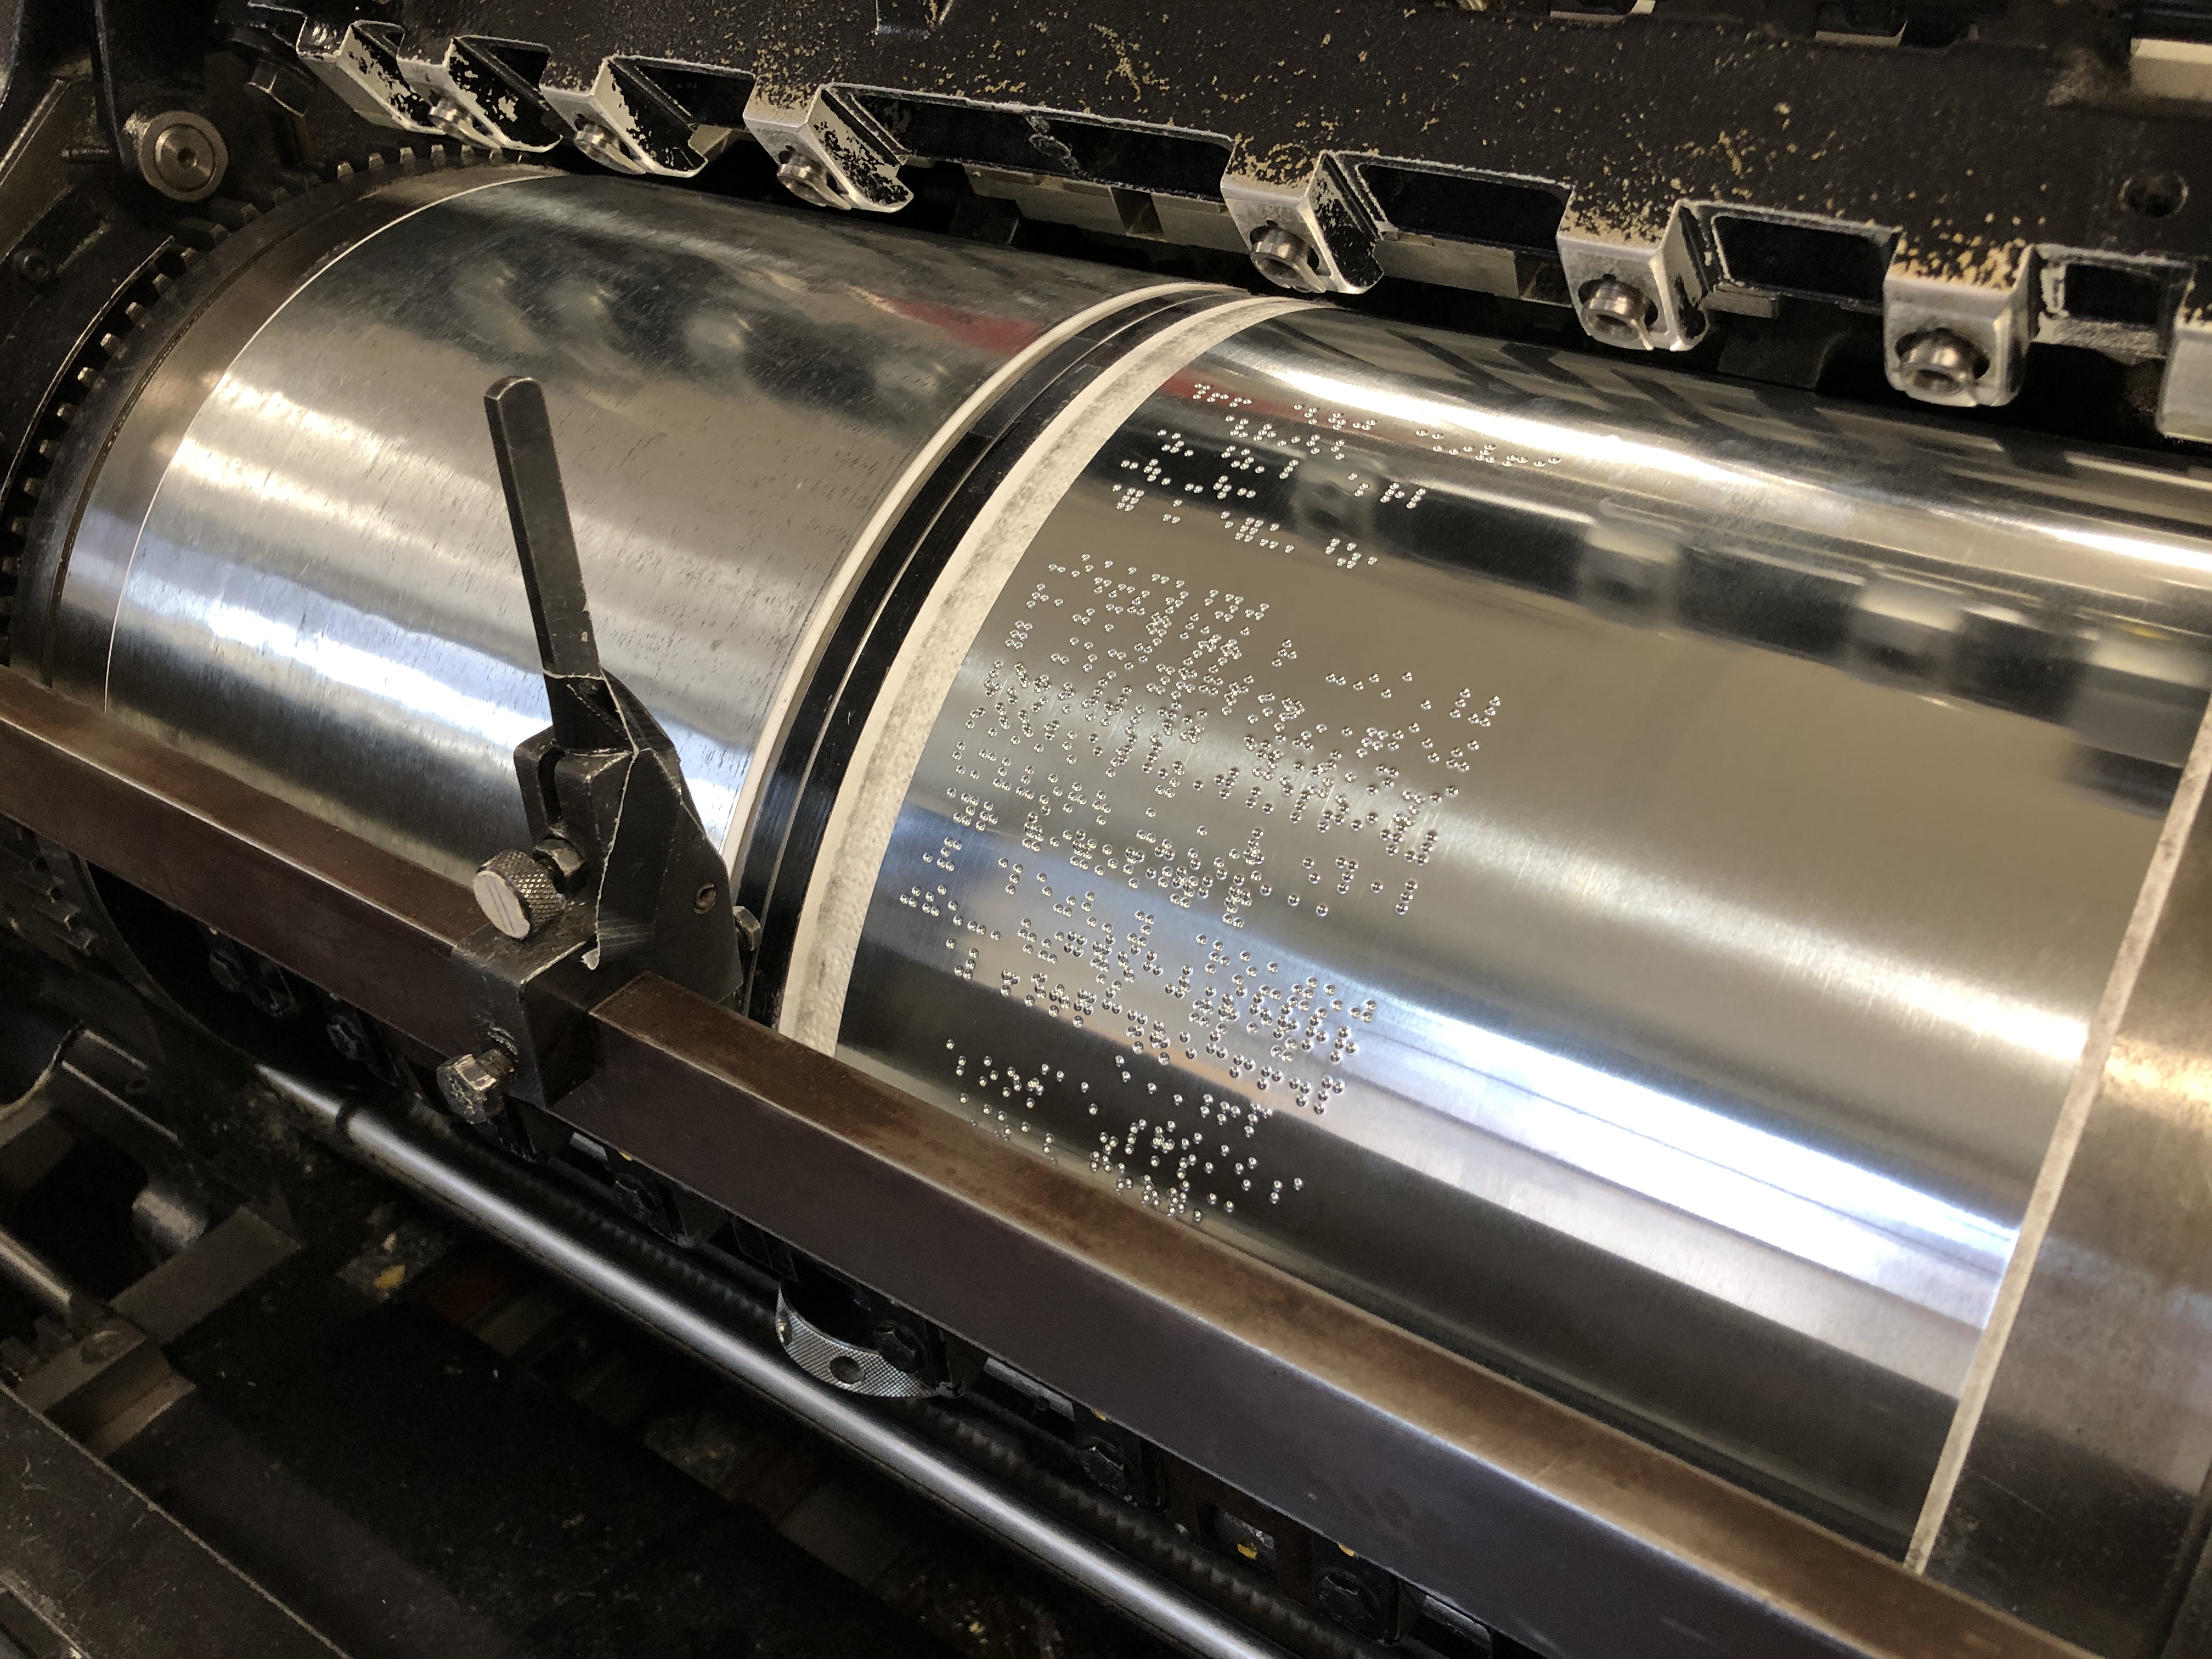 A close-up of the metal cylinders in the Heidelberg braille printing press, which has braille dots engraved on it, to be embossed on paper.